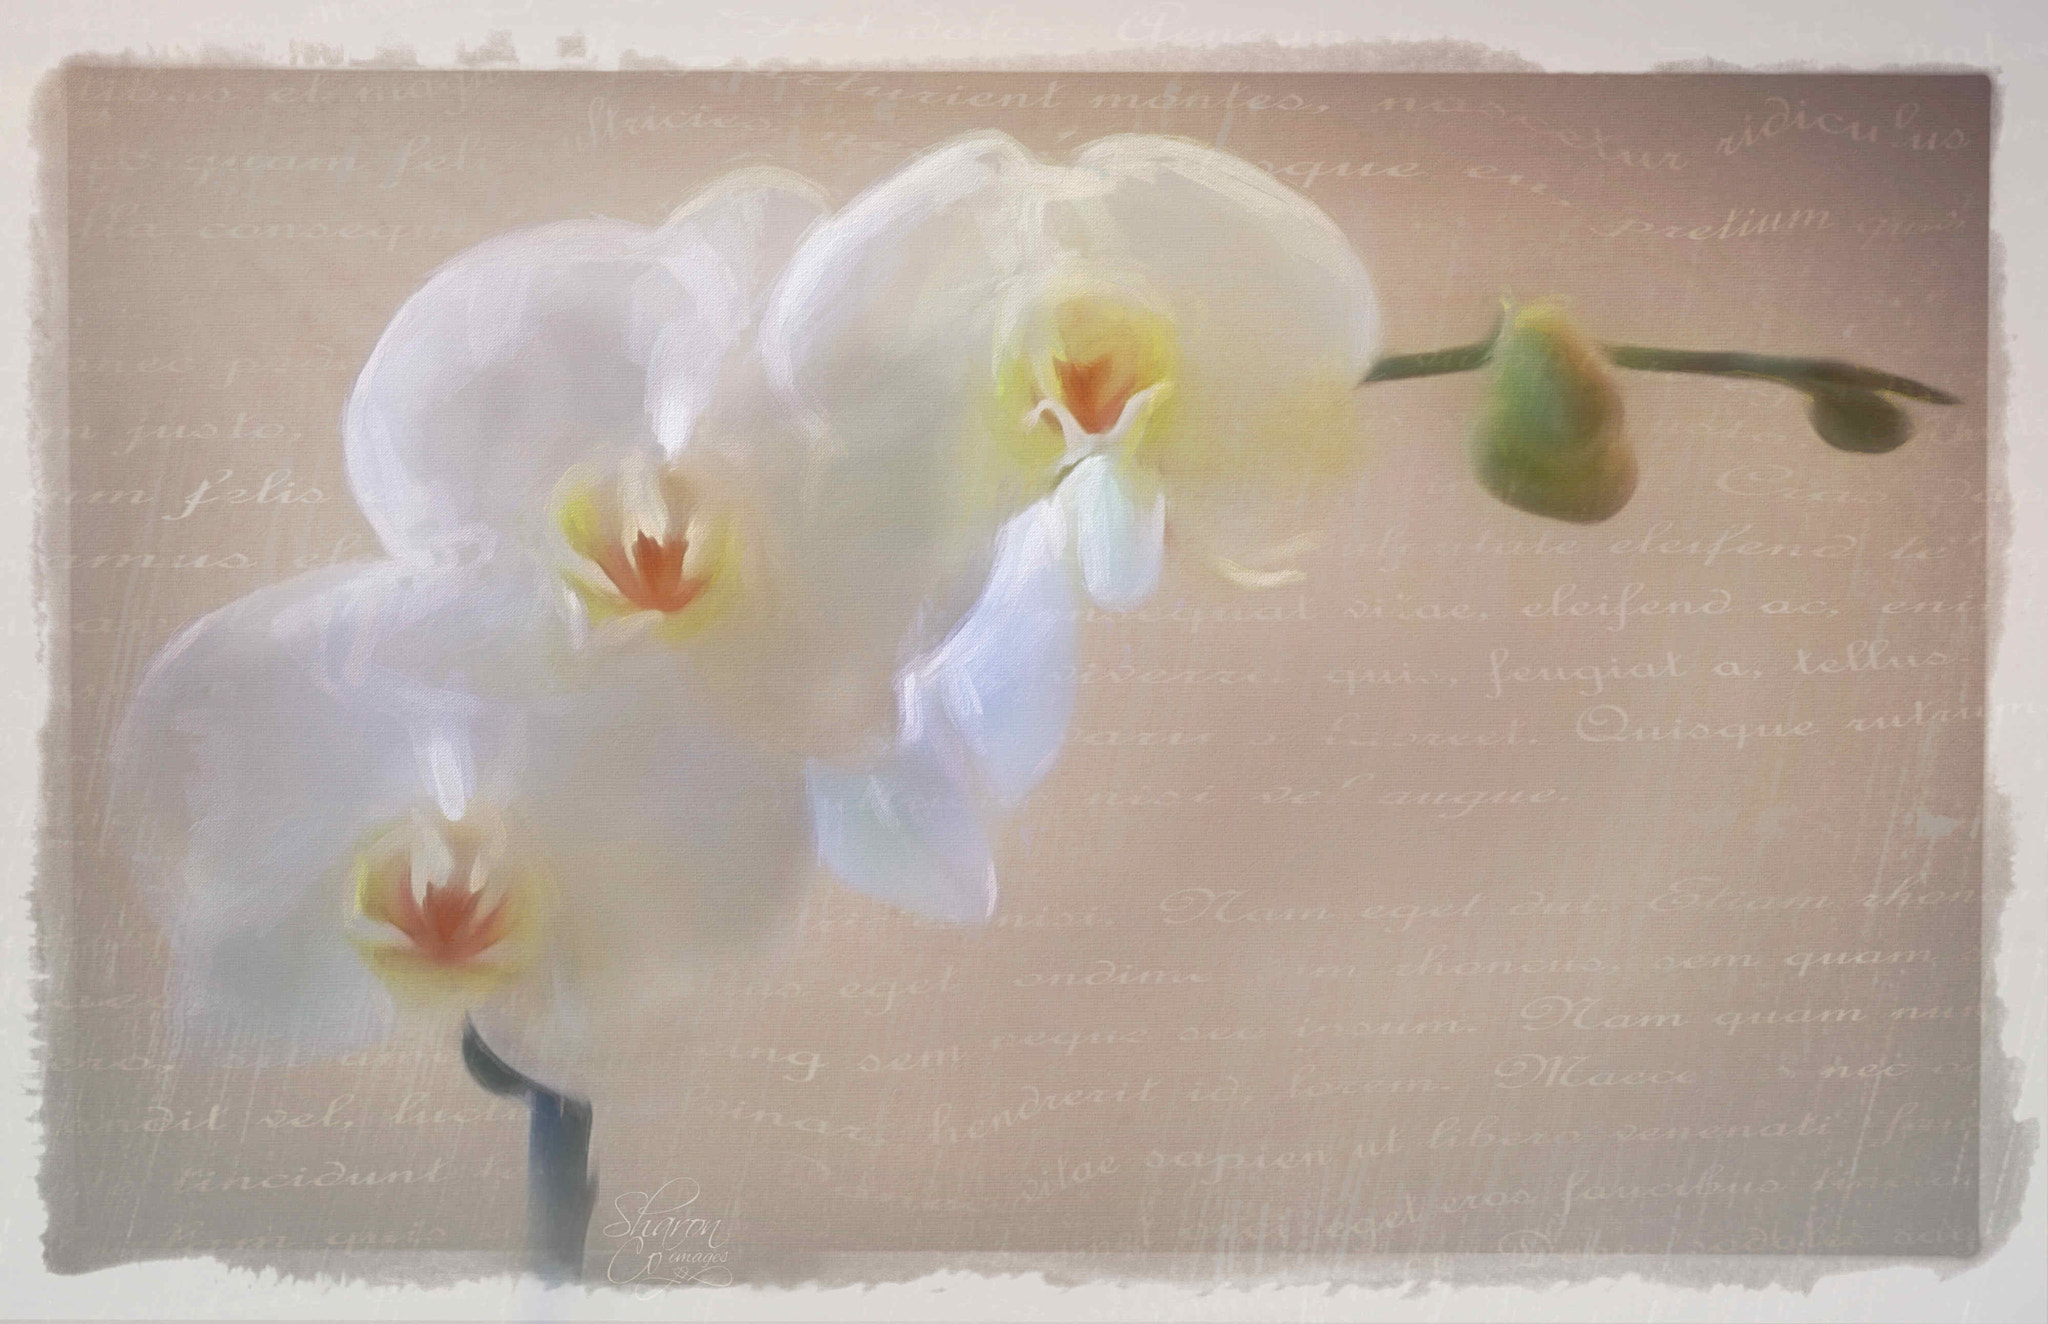 LG LEON 4G LTE sample photo. White orchid spray photography